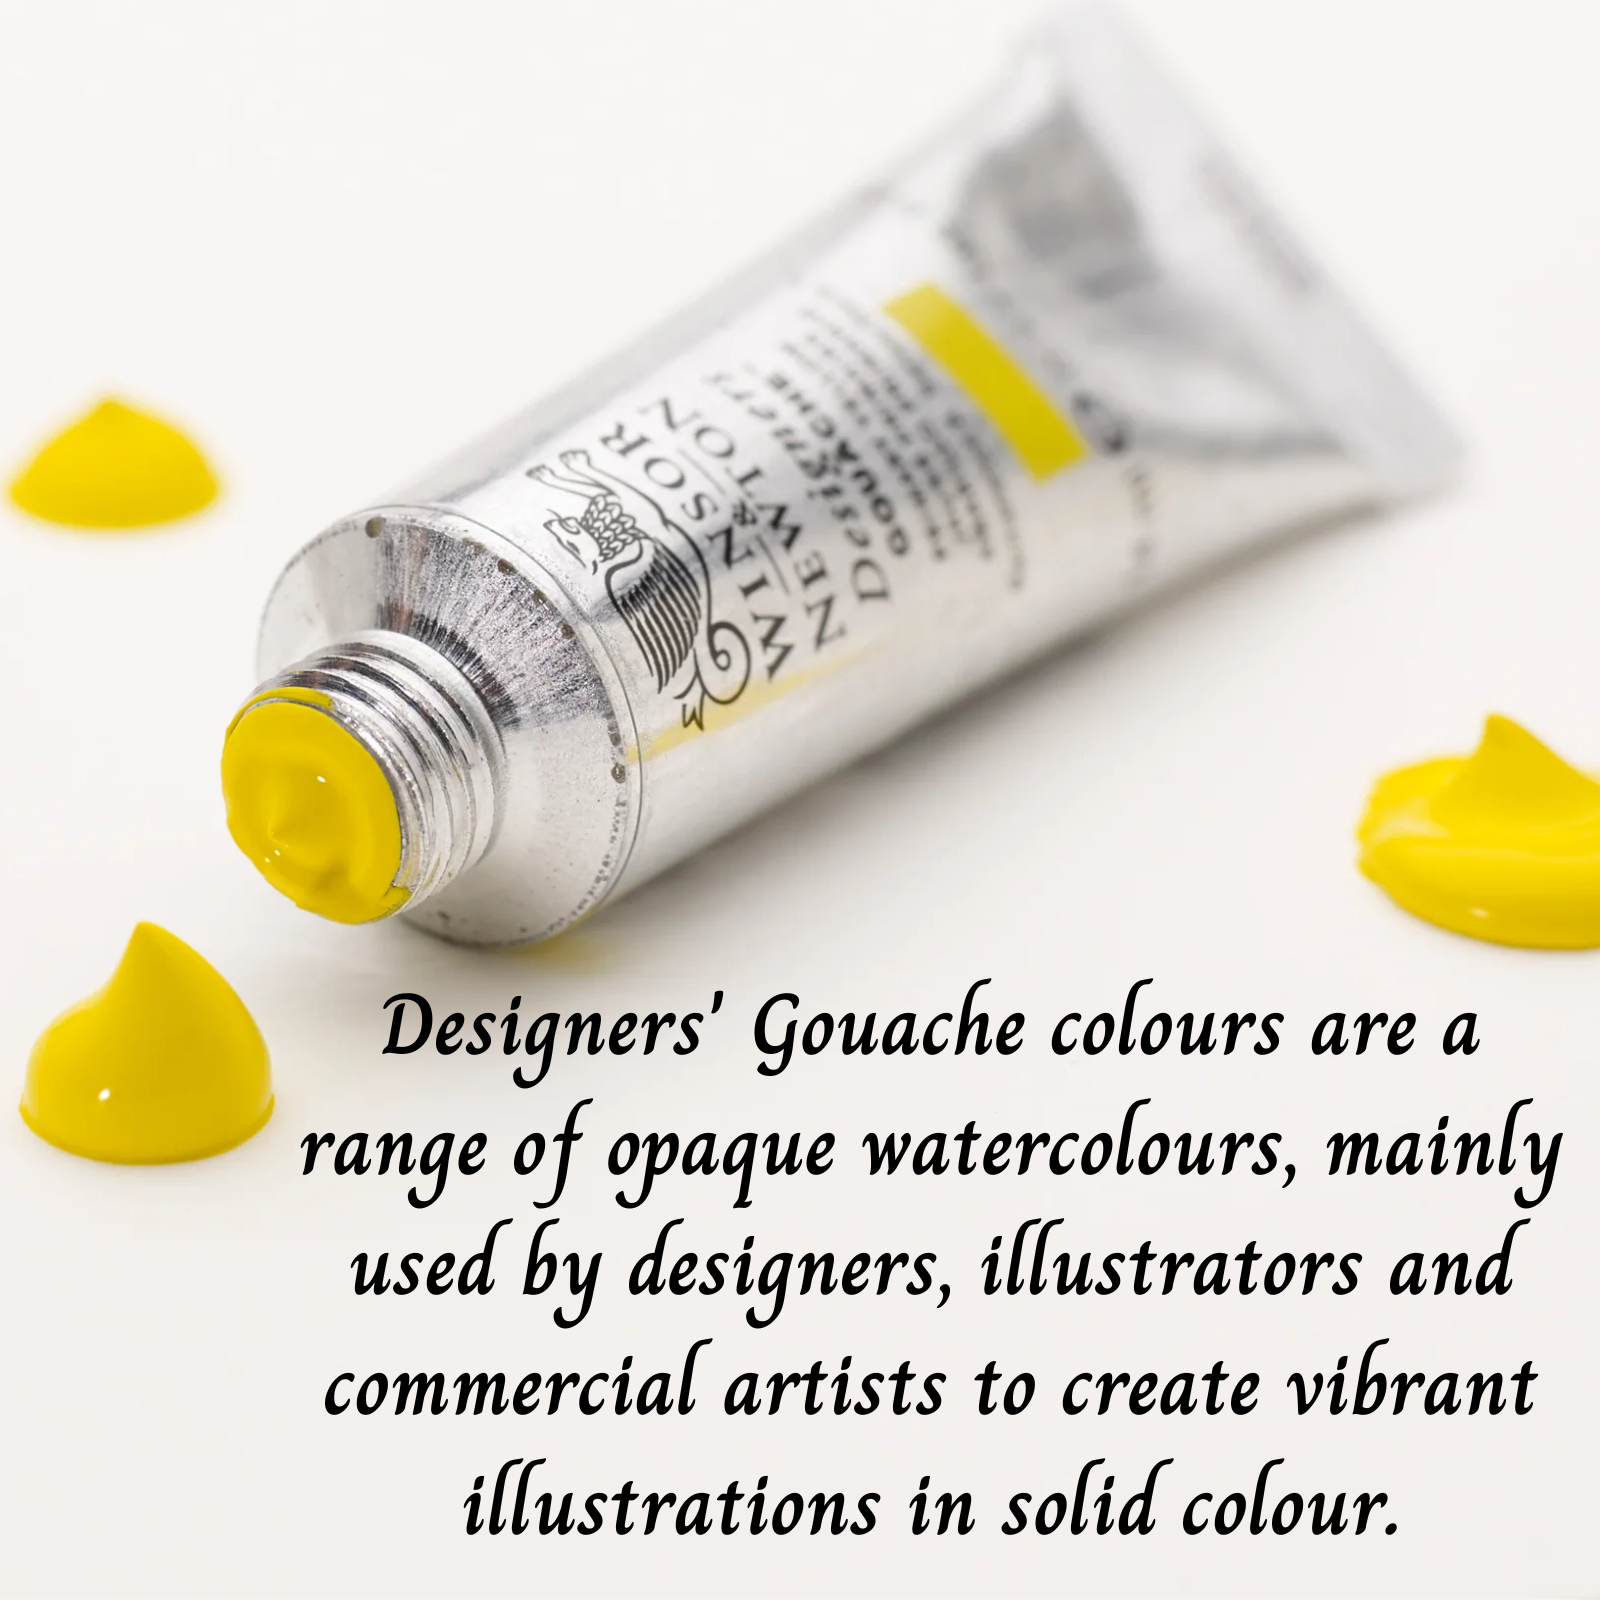 Winsor & Newton 6 Designers Gouache Primary Colours, 14ml Tube, Painting - used by designers, illustrators & artists